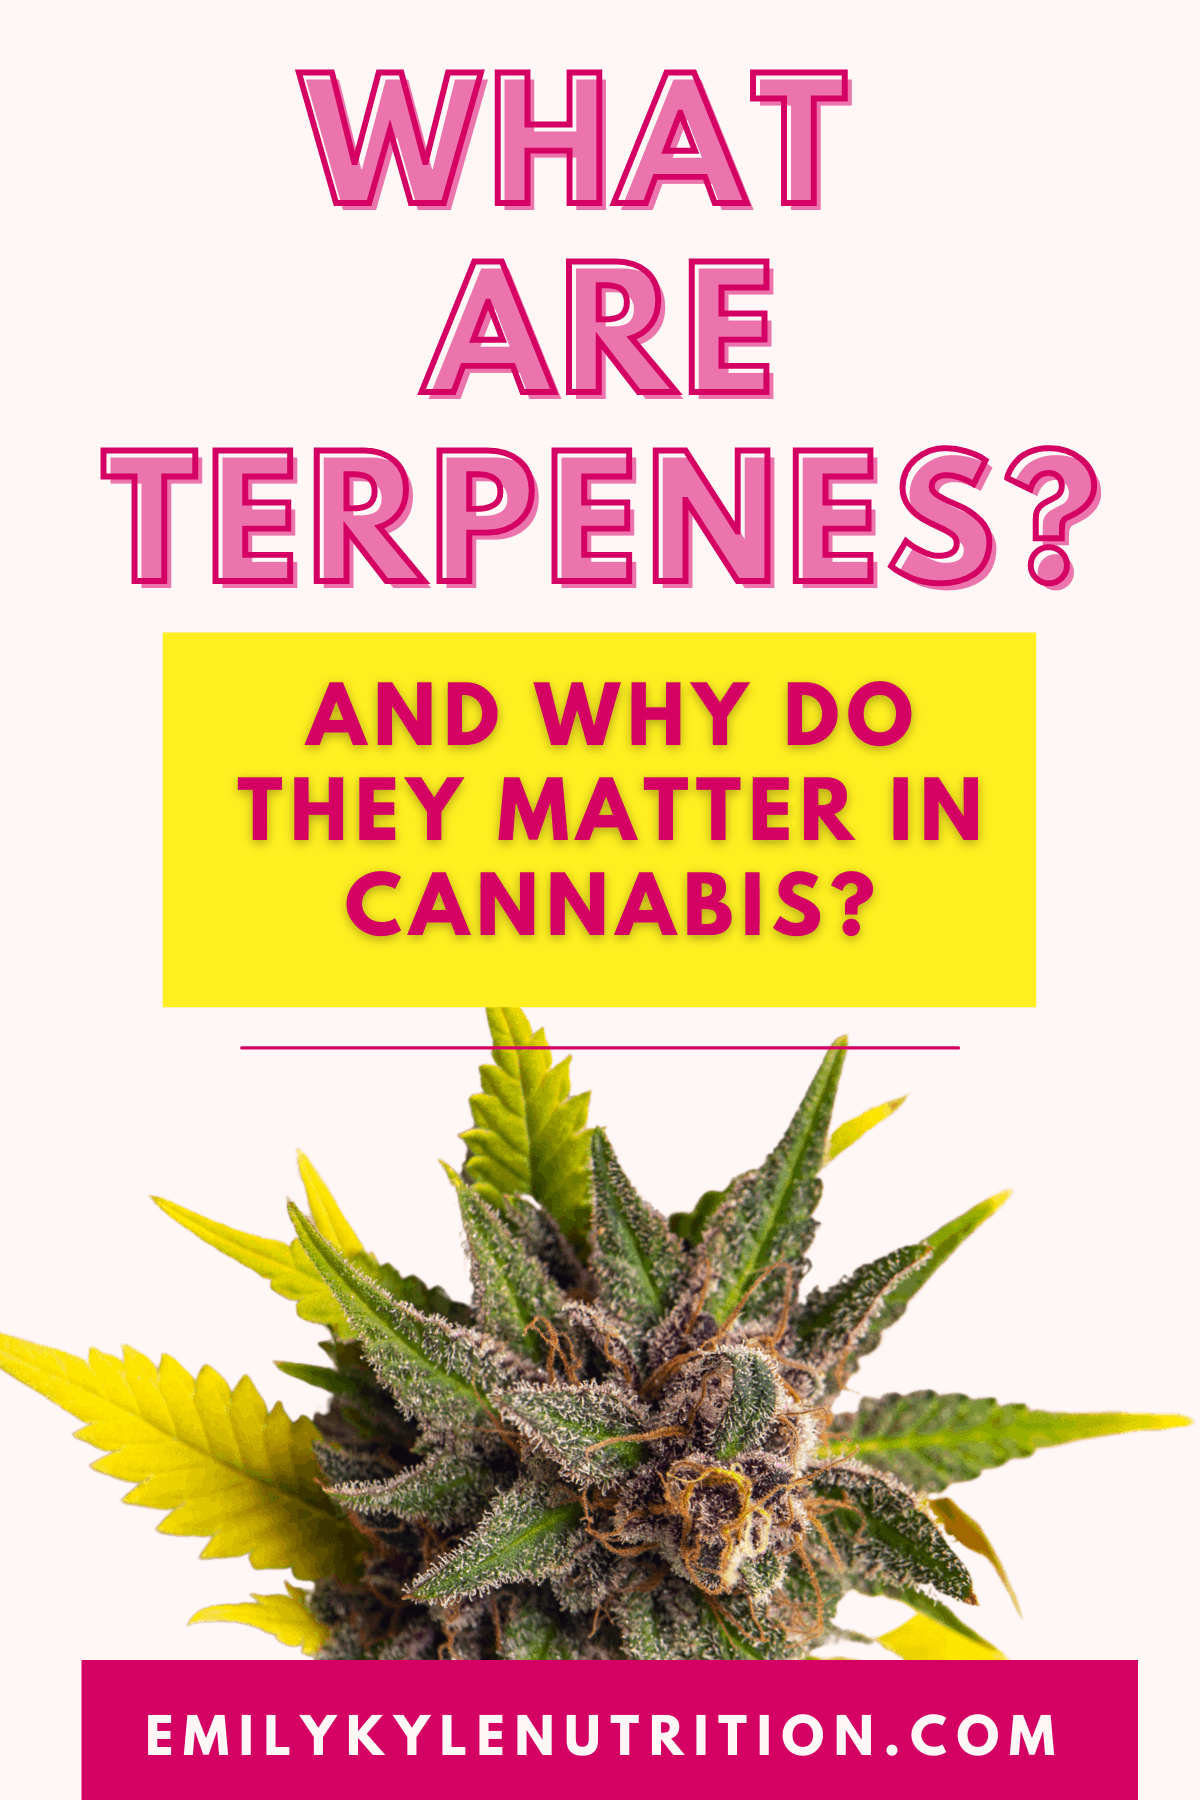 What Are Terpenes?